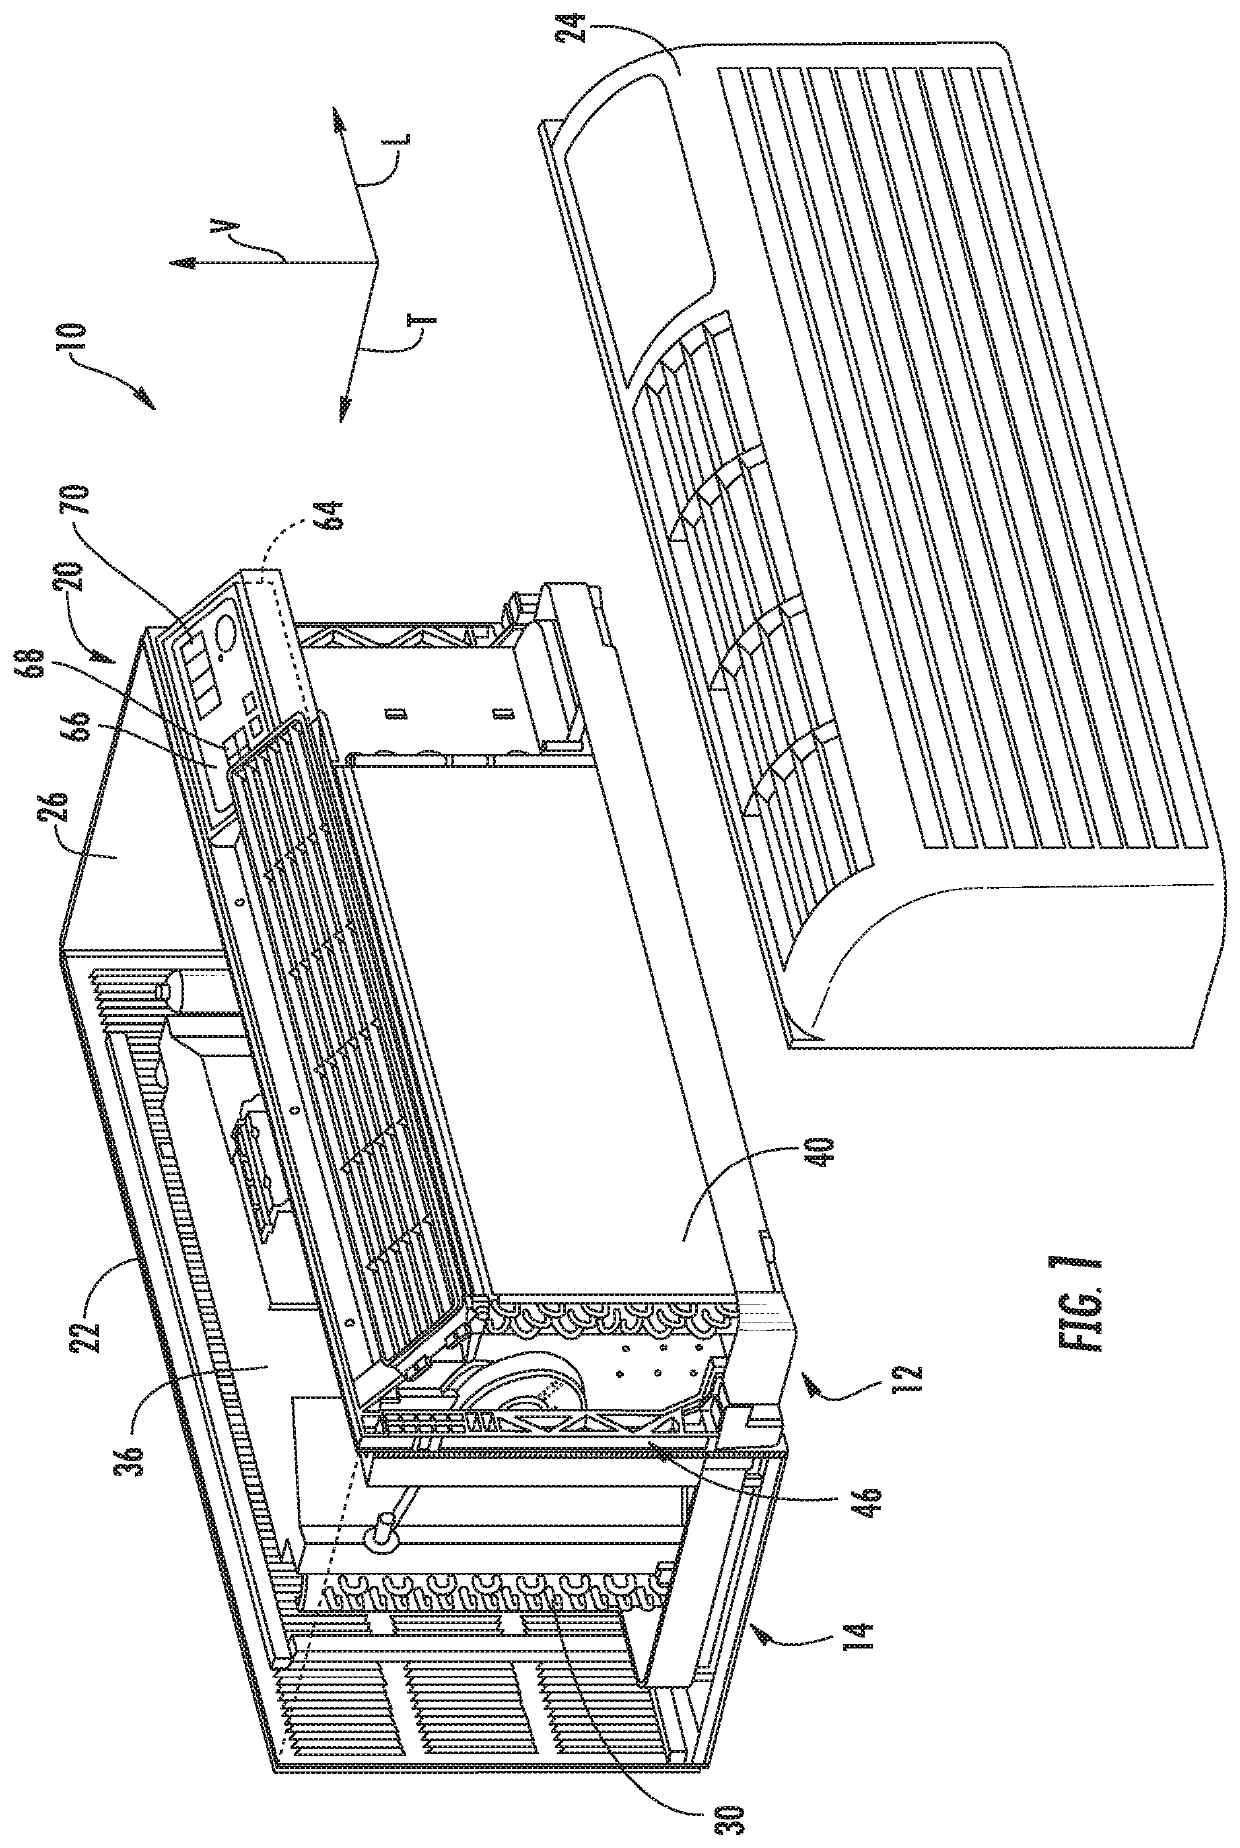 Make-up air flow restrictor for a packaged terminal air conditioner unit